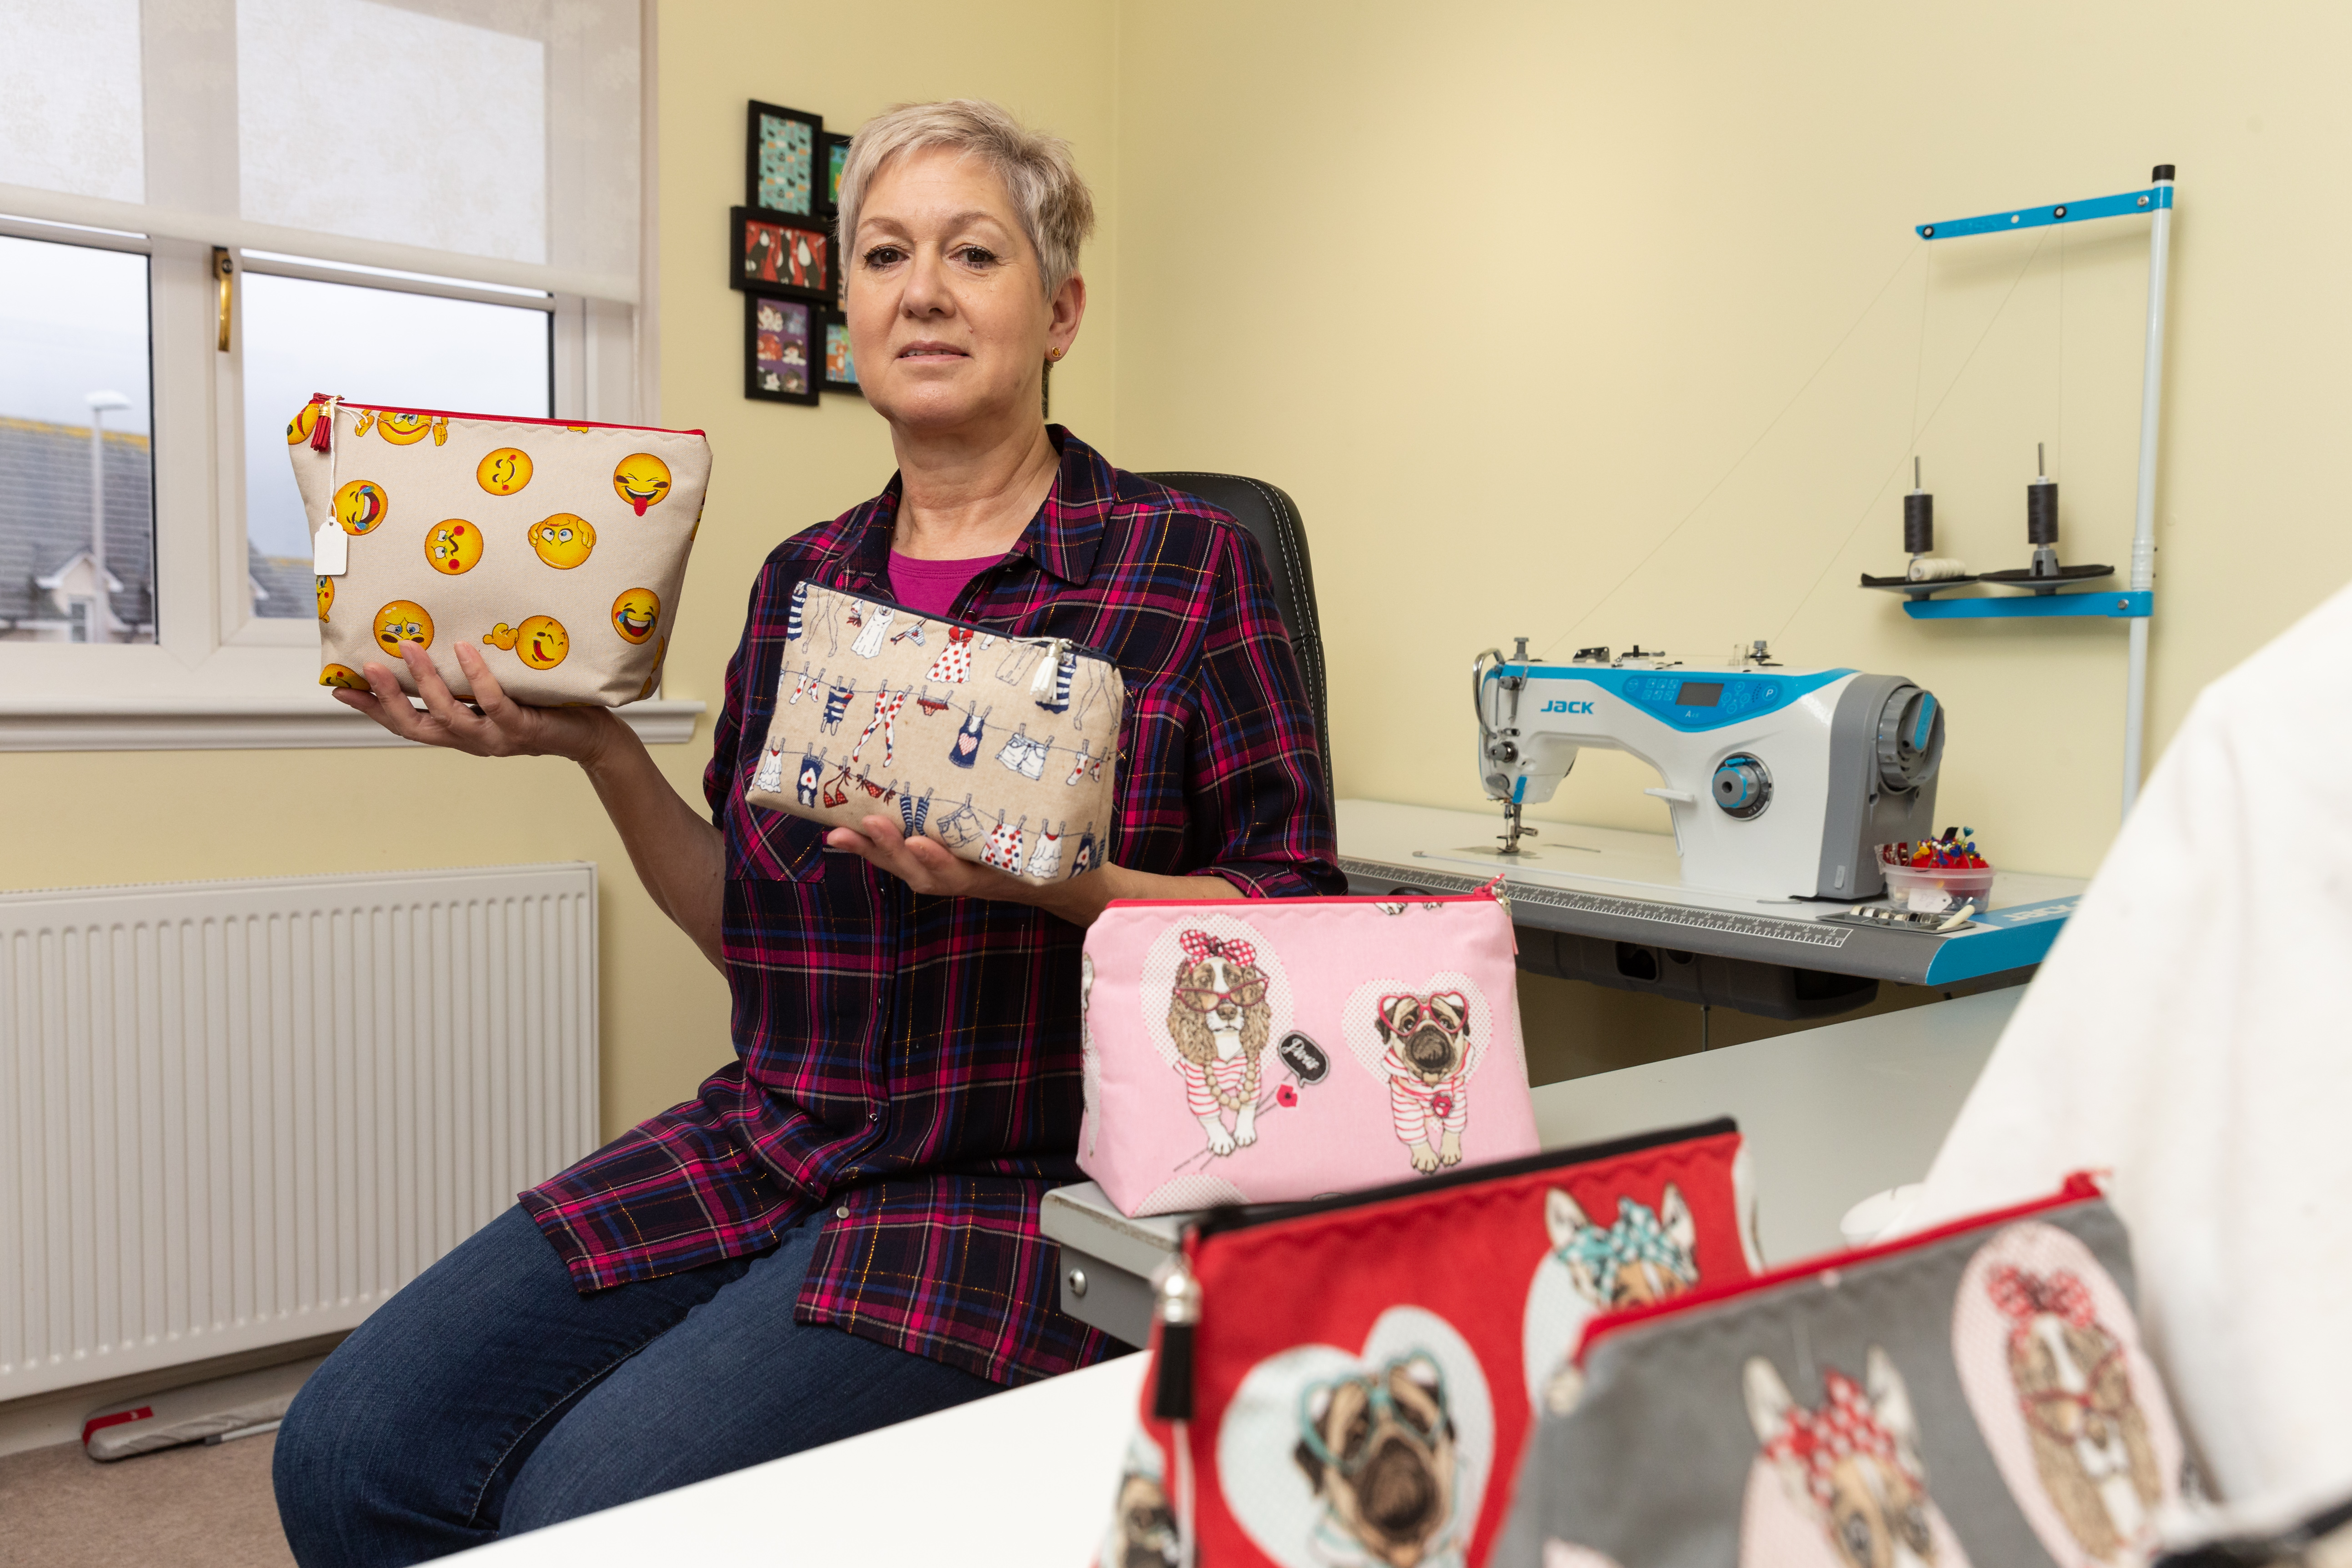 Alison Barwell had problems when she ordered a new sewing machine that didn't arrive. The Sunday Post came to the rescue and got her a refund so she could get her new machine. (Newsline Media)